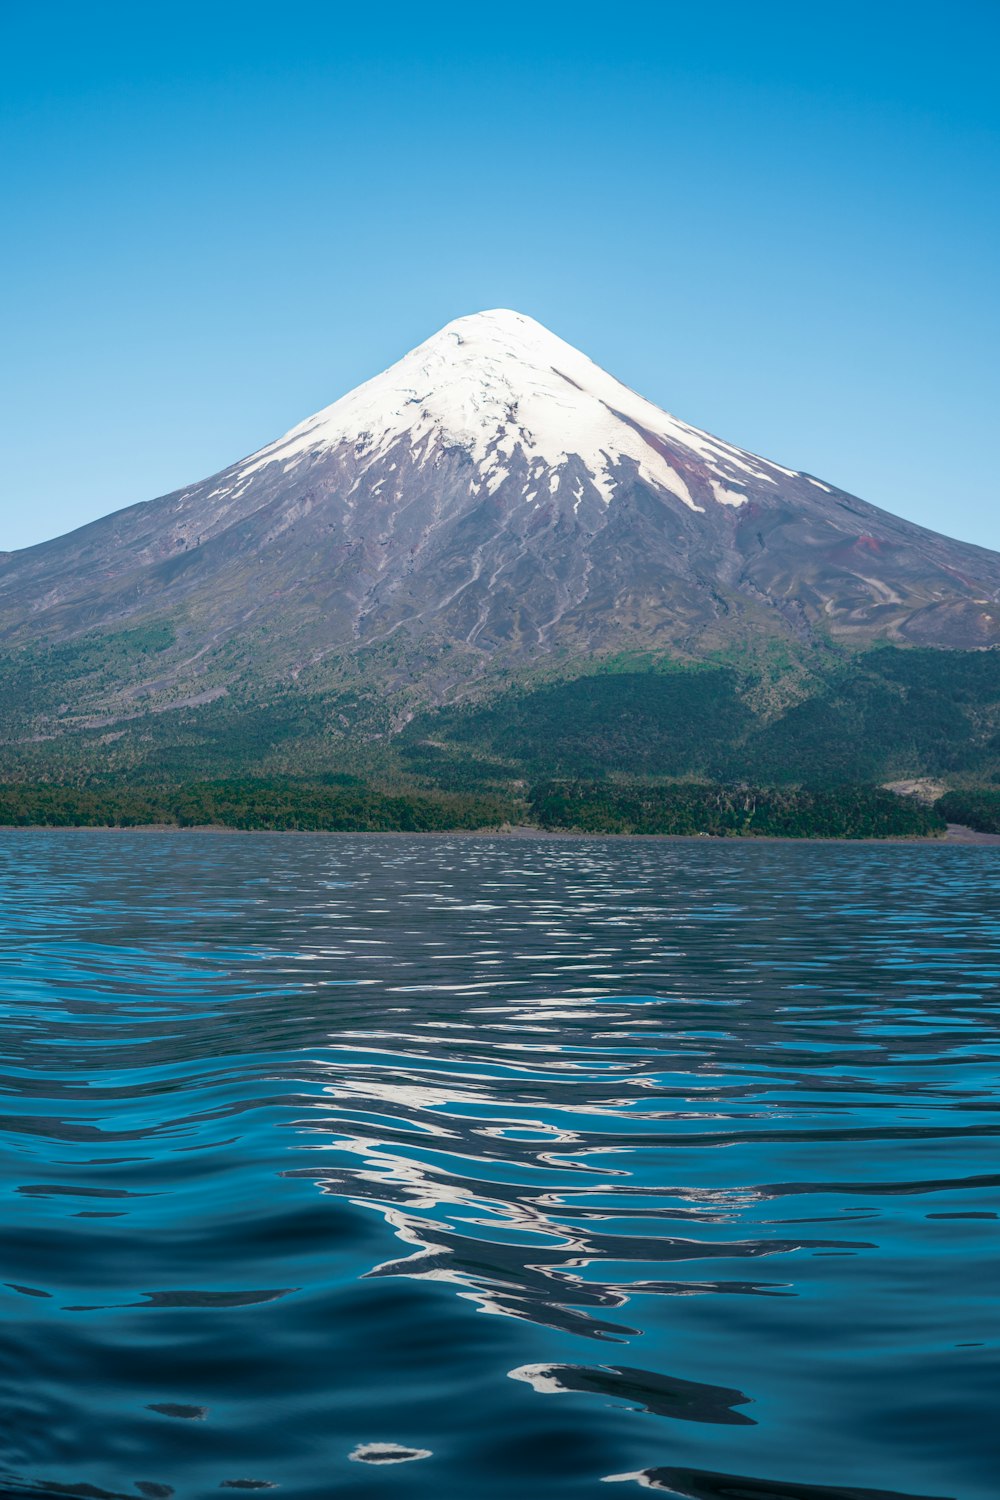 a mountain with a snow capped peak is seen from the water